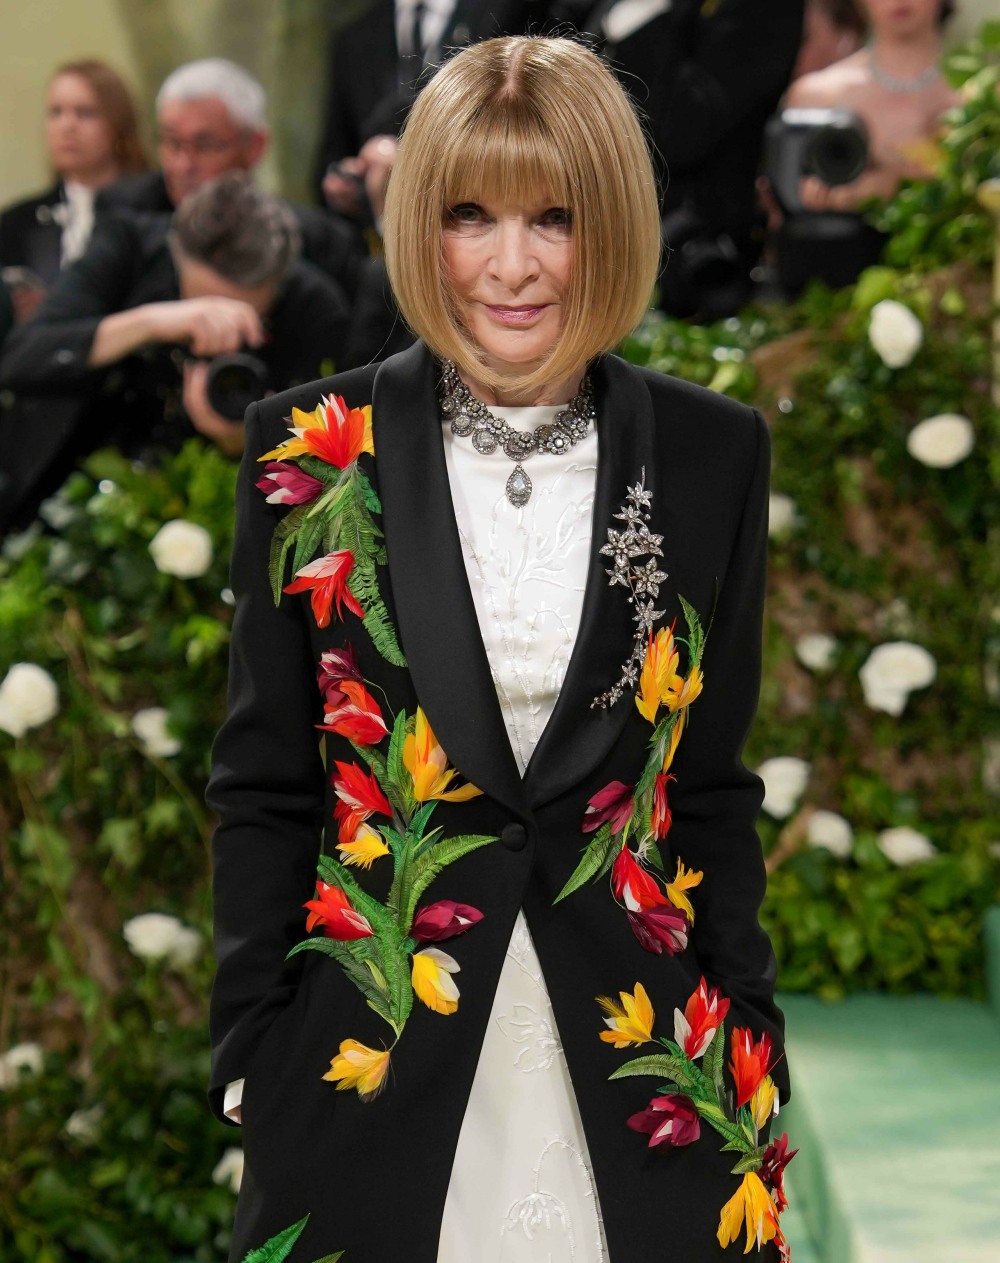 Anna Wintour apologized for the ‘deep confusion’ over this year’s Met Gala theme